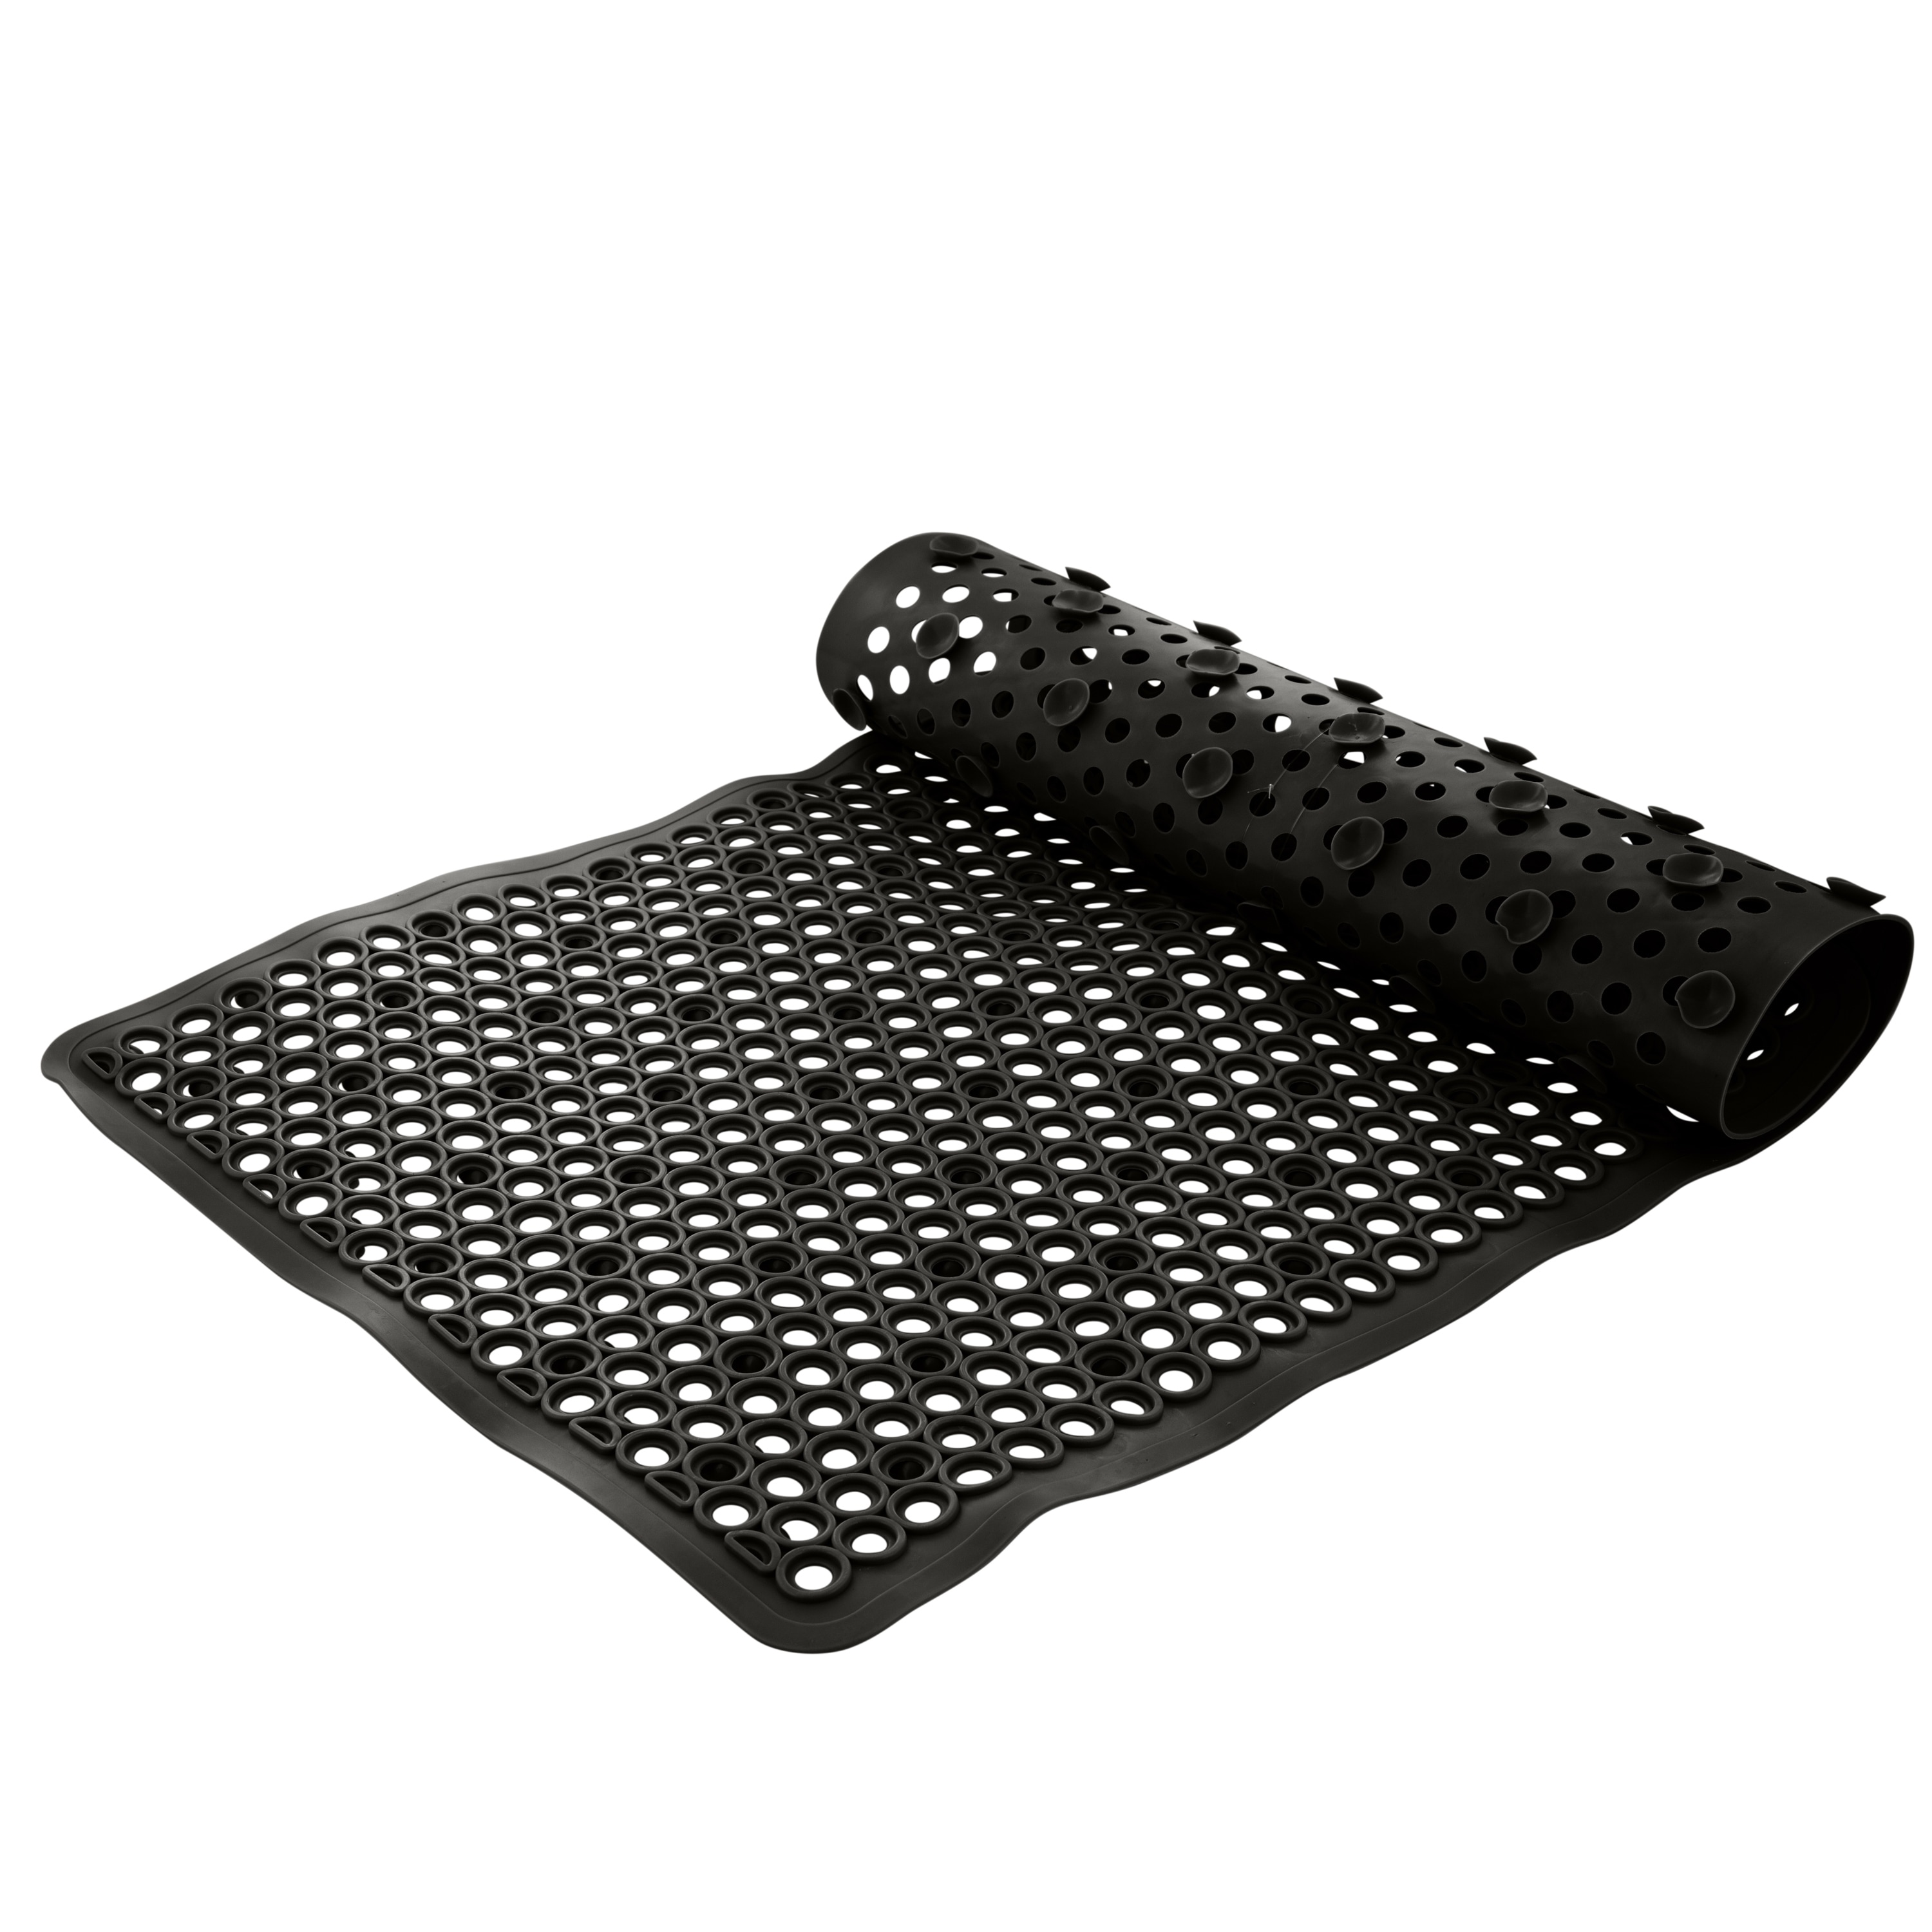 Microwave Splatter Cover Keeps Your Microwave Spotless, BA291-6 - On Sale -  Bed Bath & Beyond - 32200886